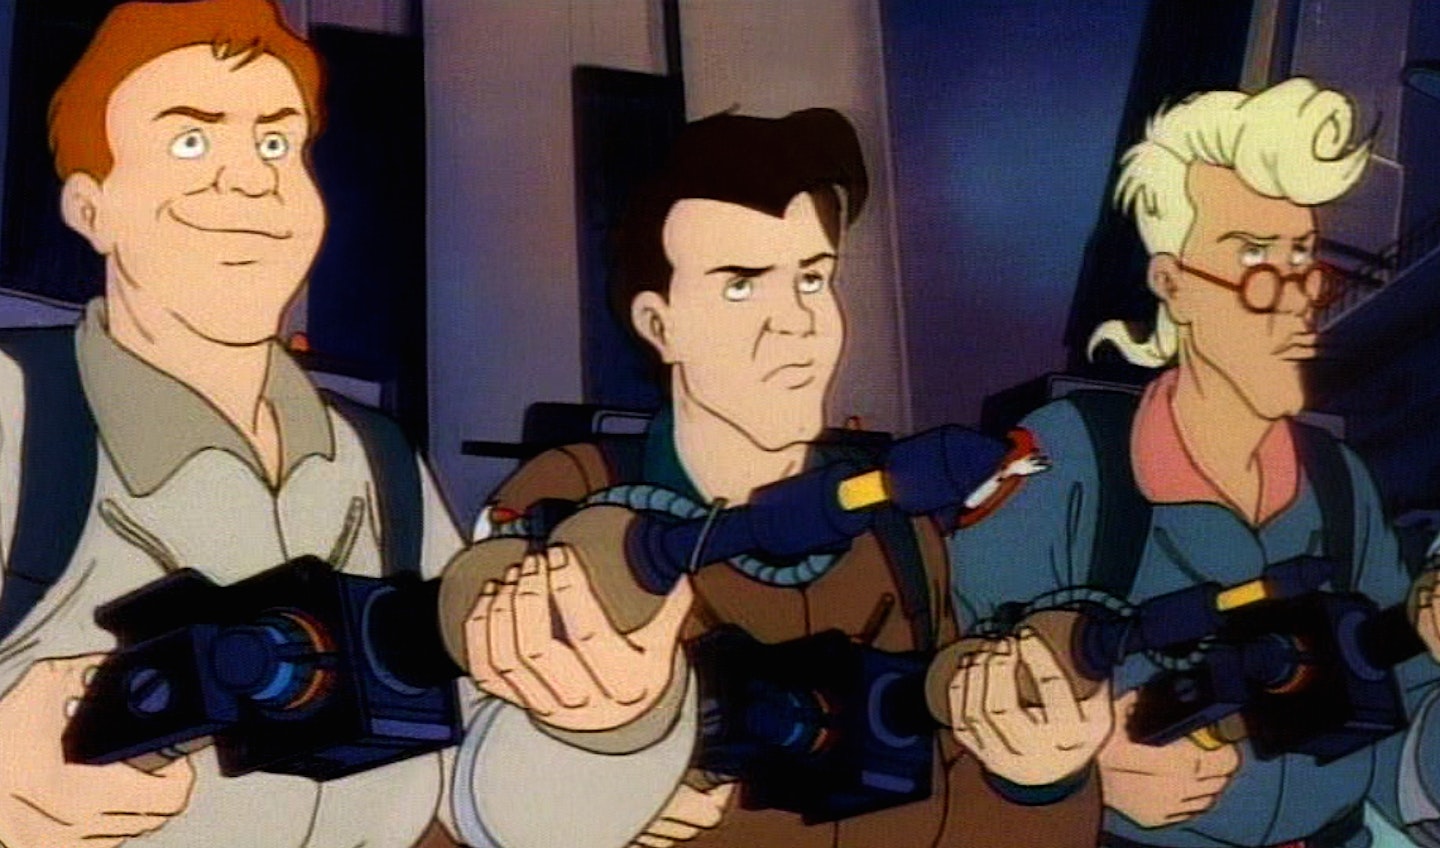 The Real Ghostbusters animated series